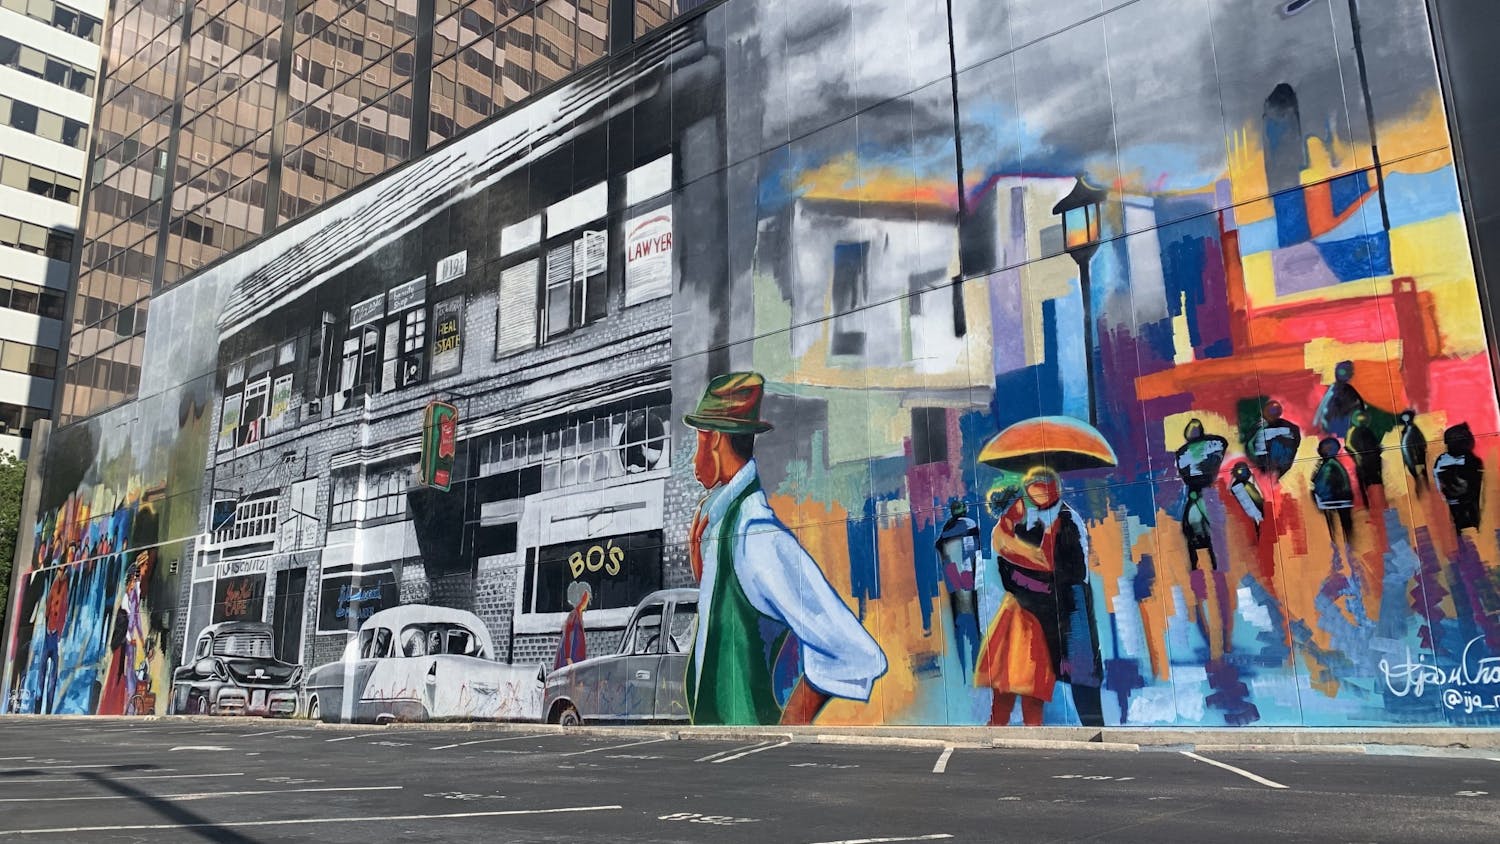 A mural depicting Black Wall Street on the side of the City of Columbia building. The artist, Ija Charles, is a 24-year-old self-starter from Columbia and Louisiana.